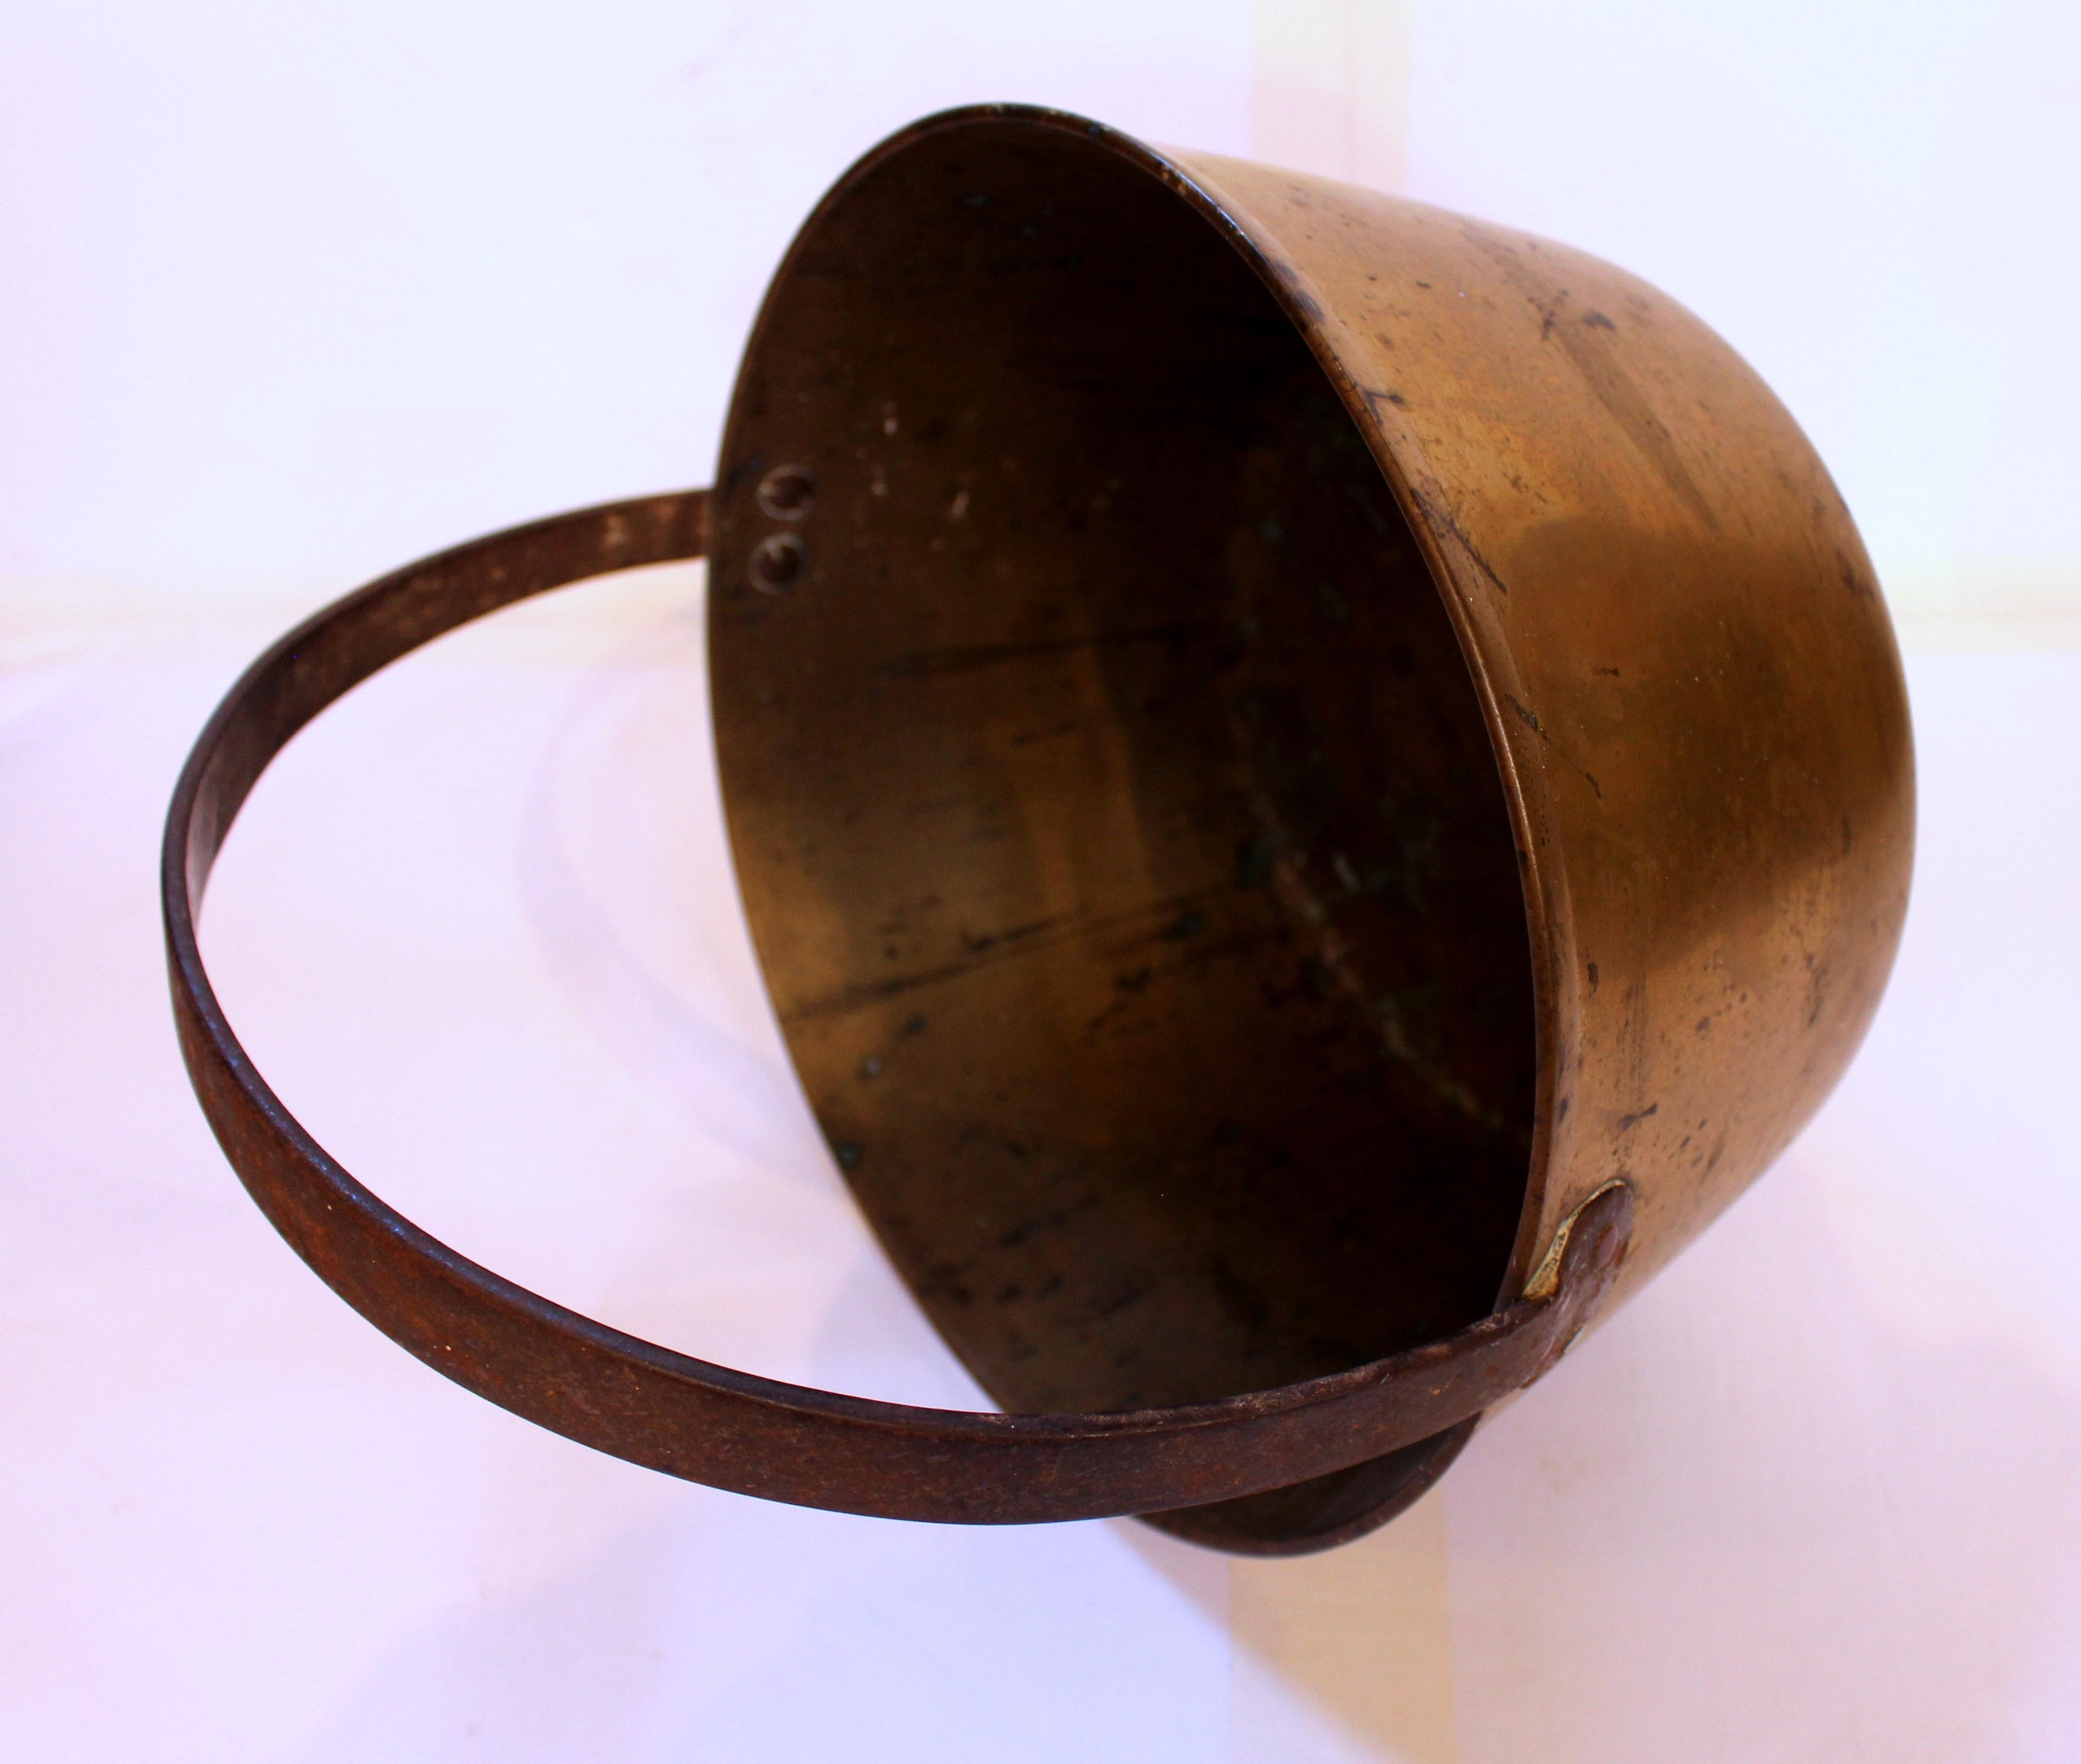 Late 19th century brass jam pot with iron handle, English. Heavy gauge spun brass and forged iron handle make this piece unusually heavy, made to last through the ages.
12